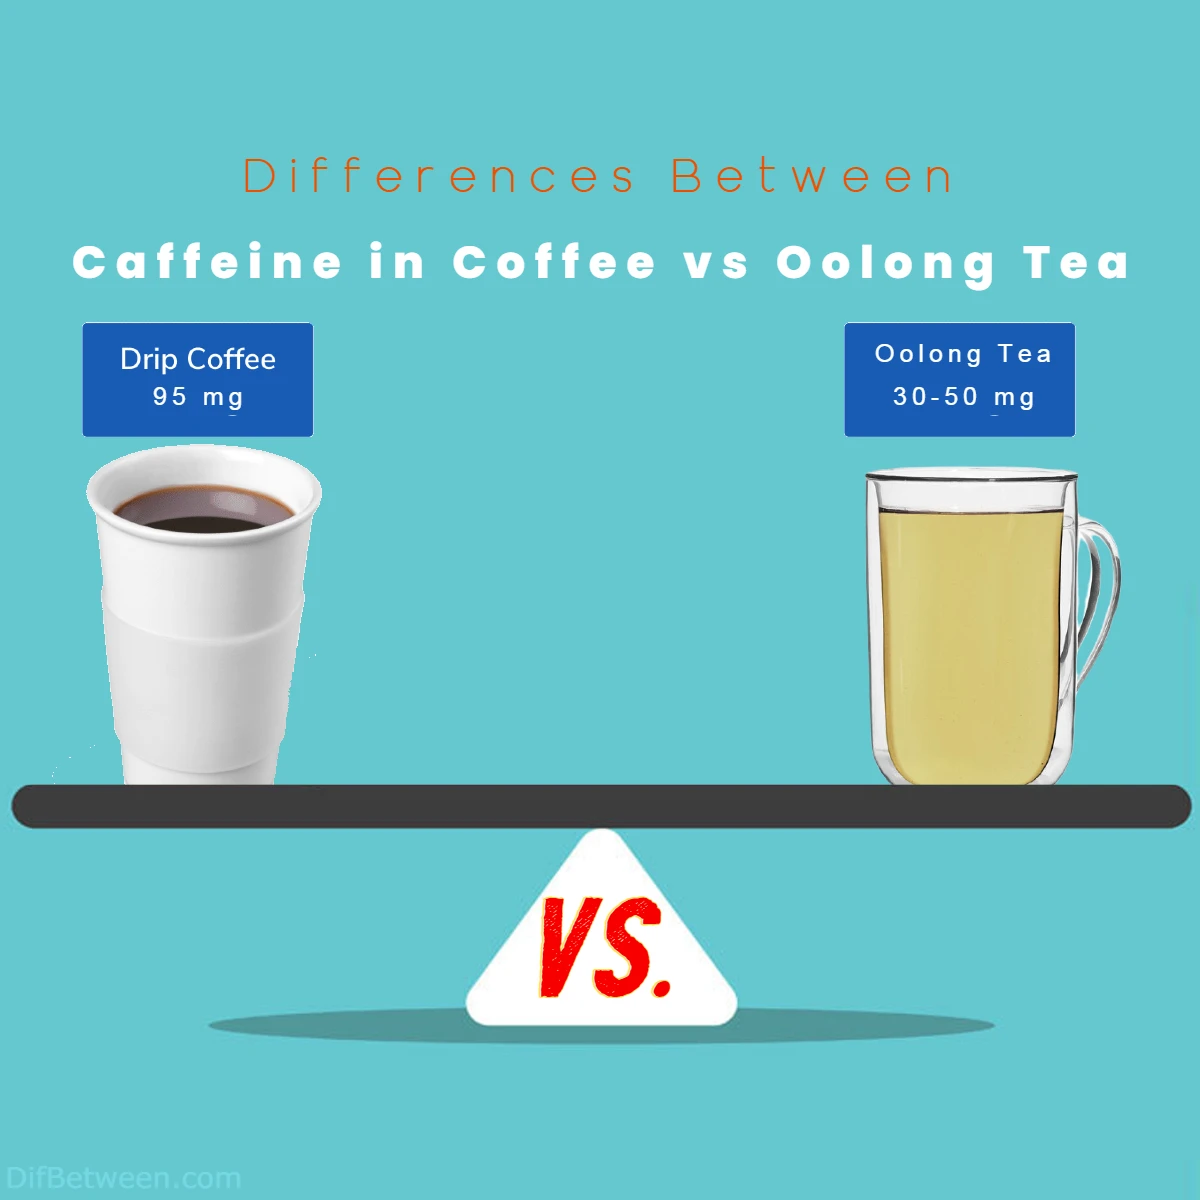 Differences Between Caffeine in Coffee and Oolong Tea